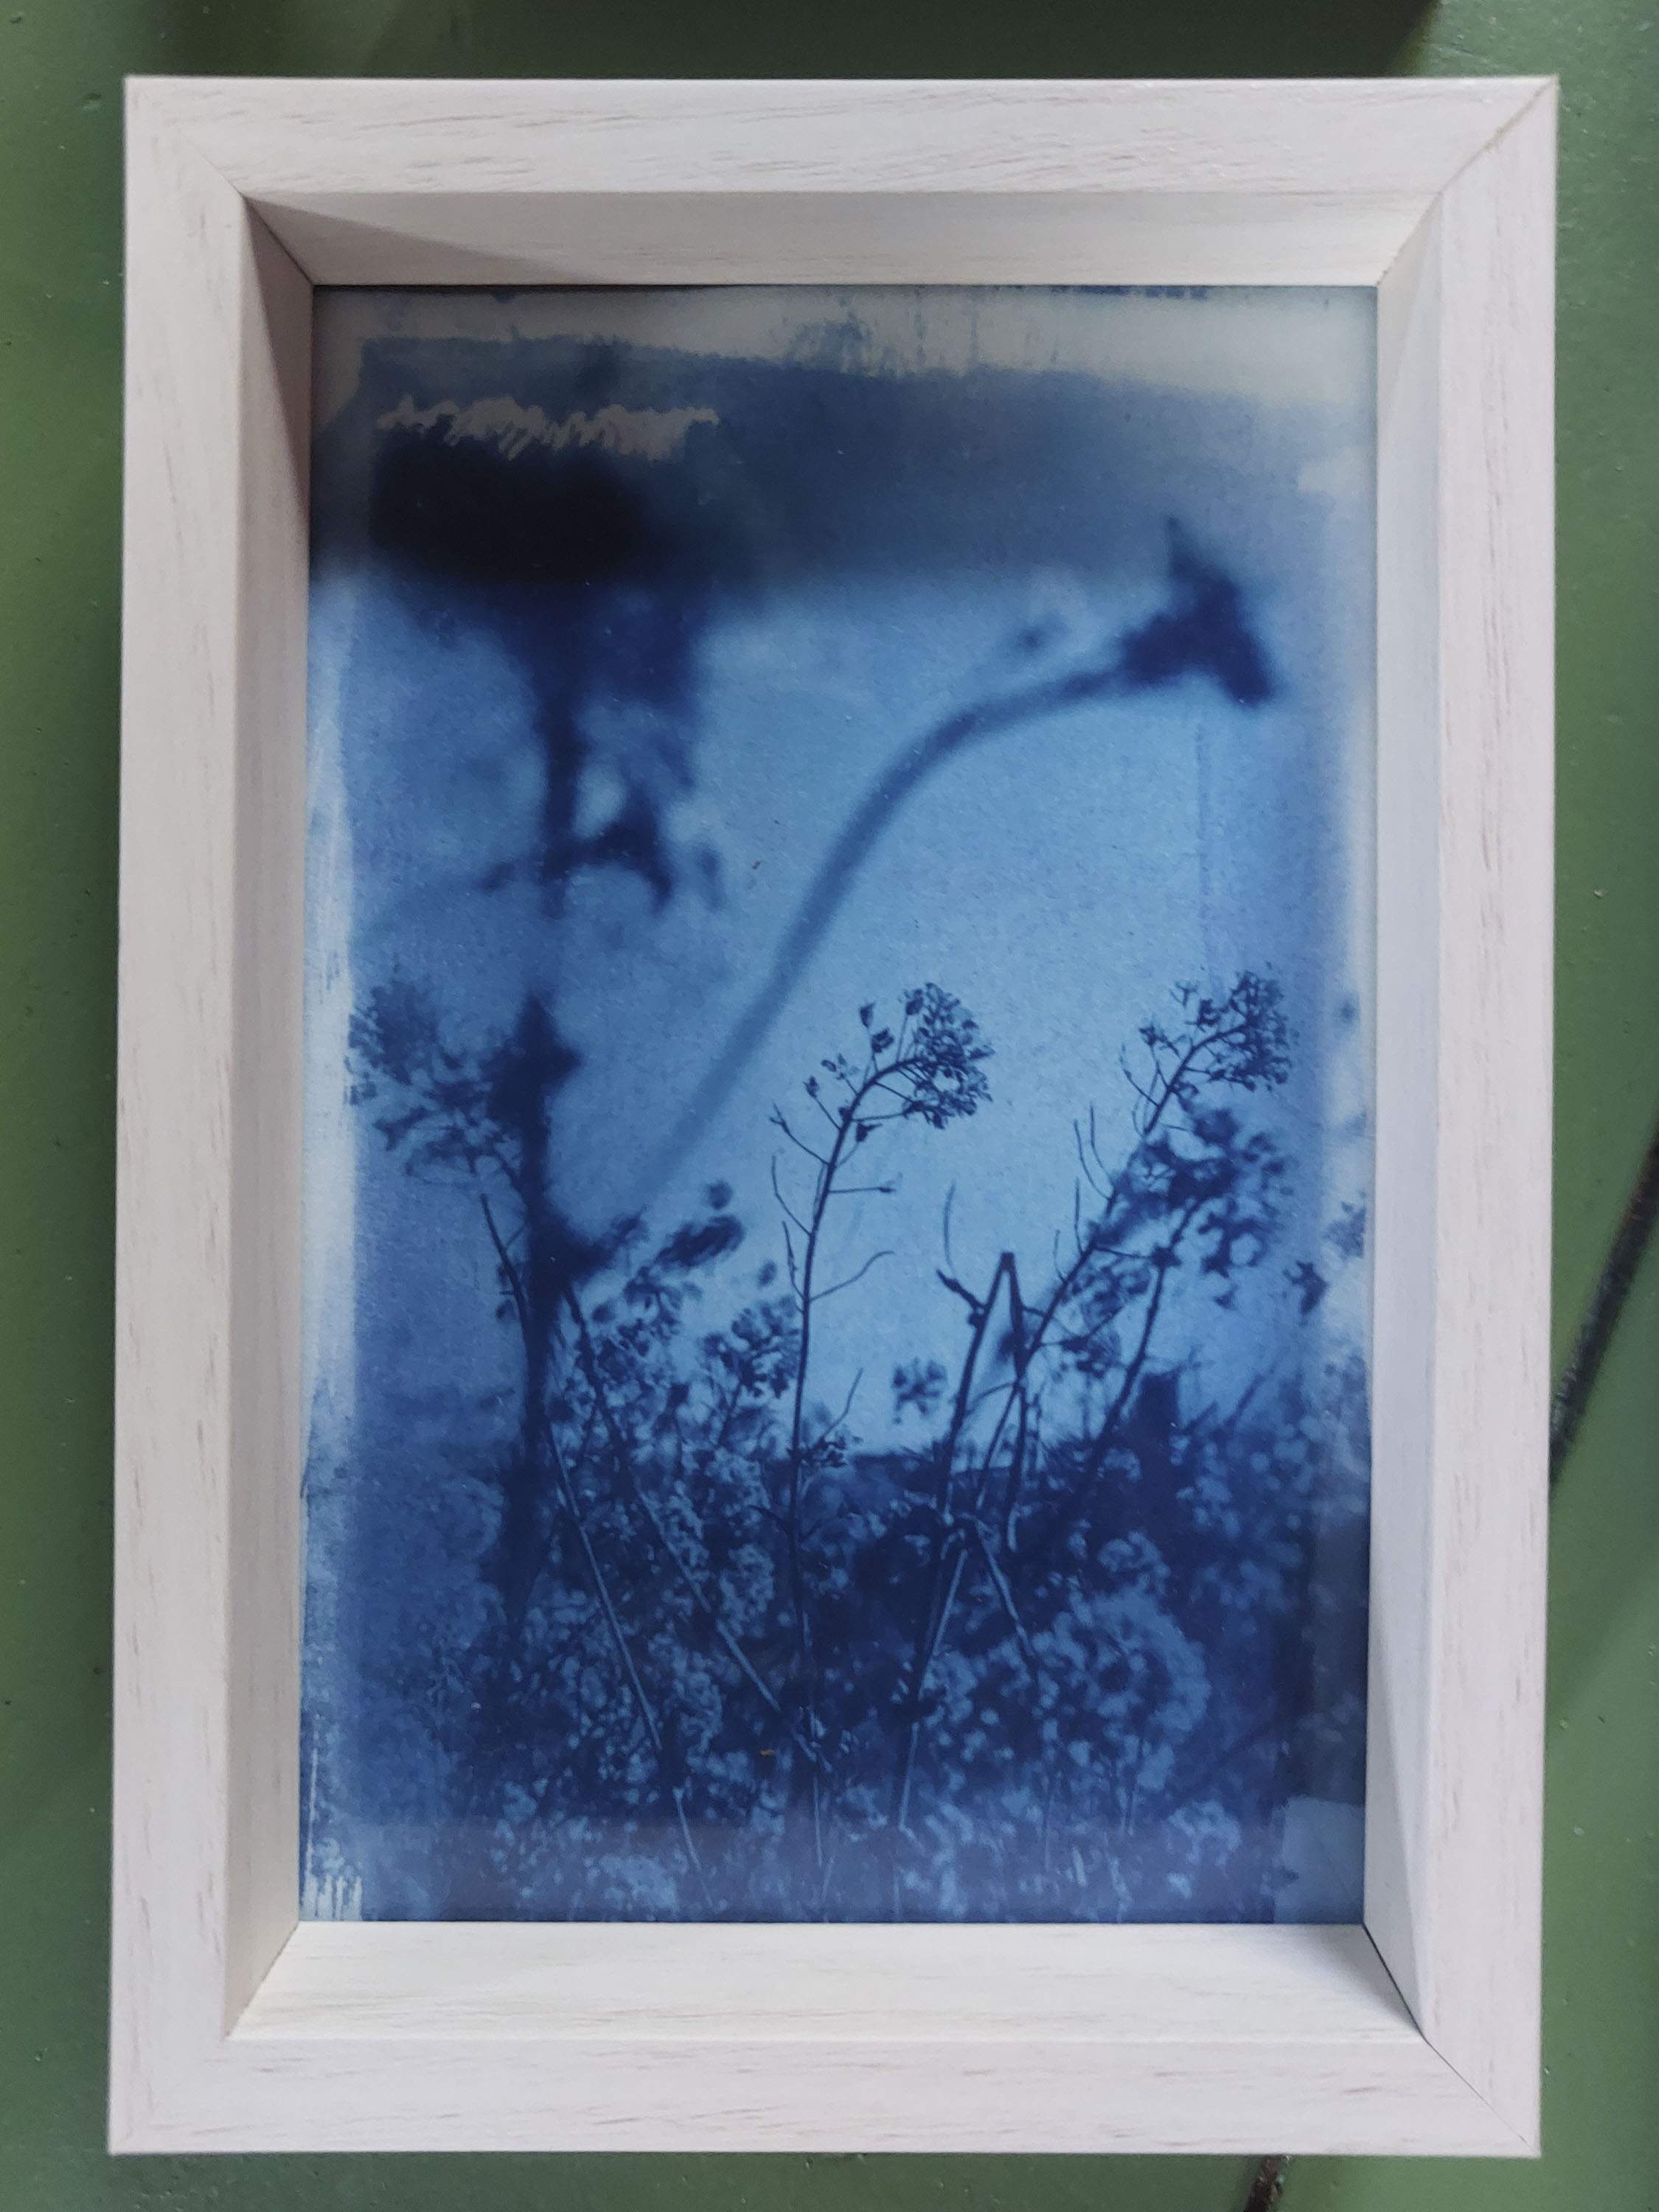 Real unique one of a kind cyanotype in woodenframe